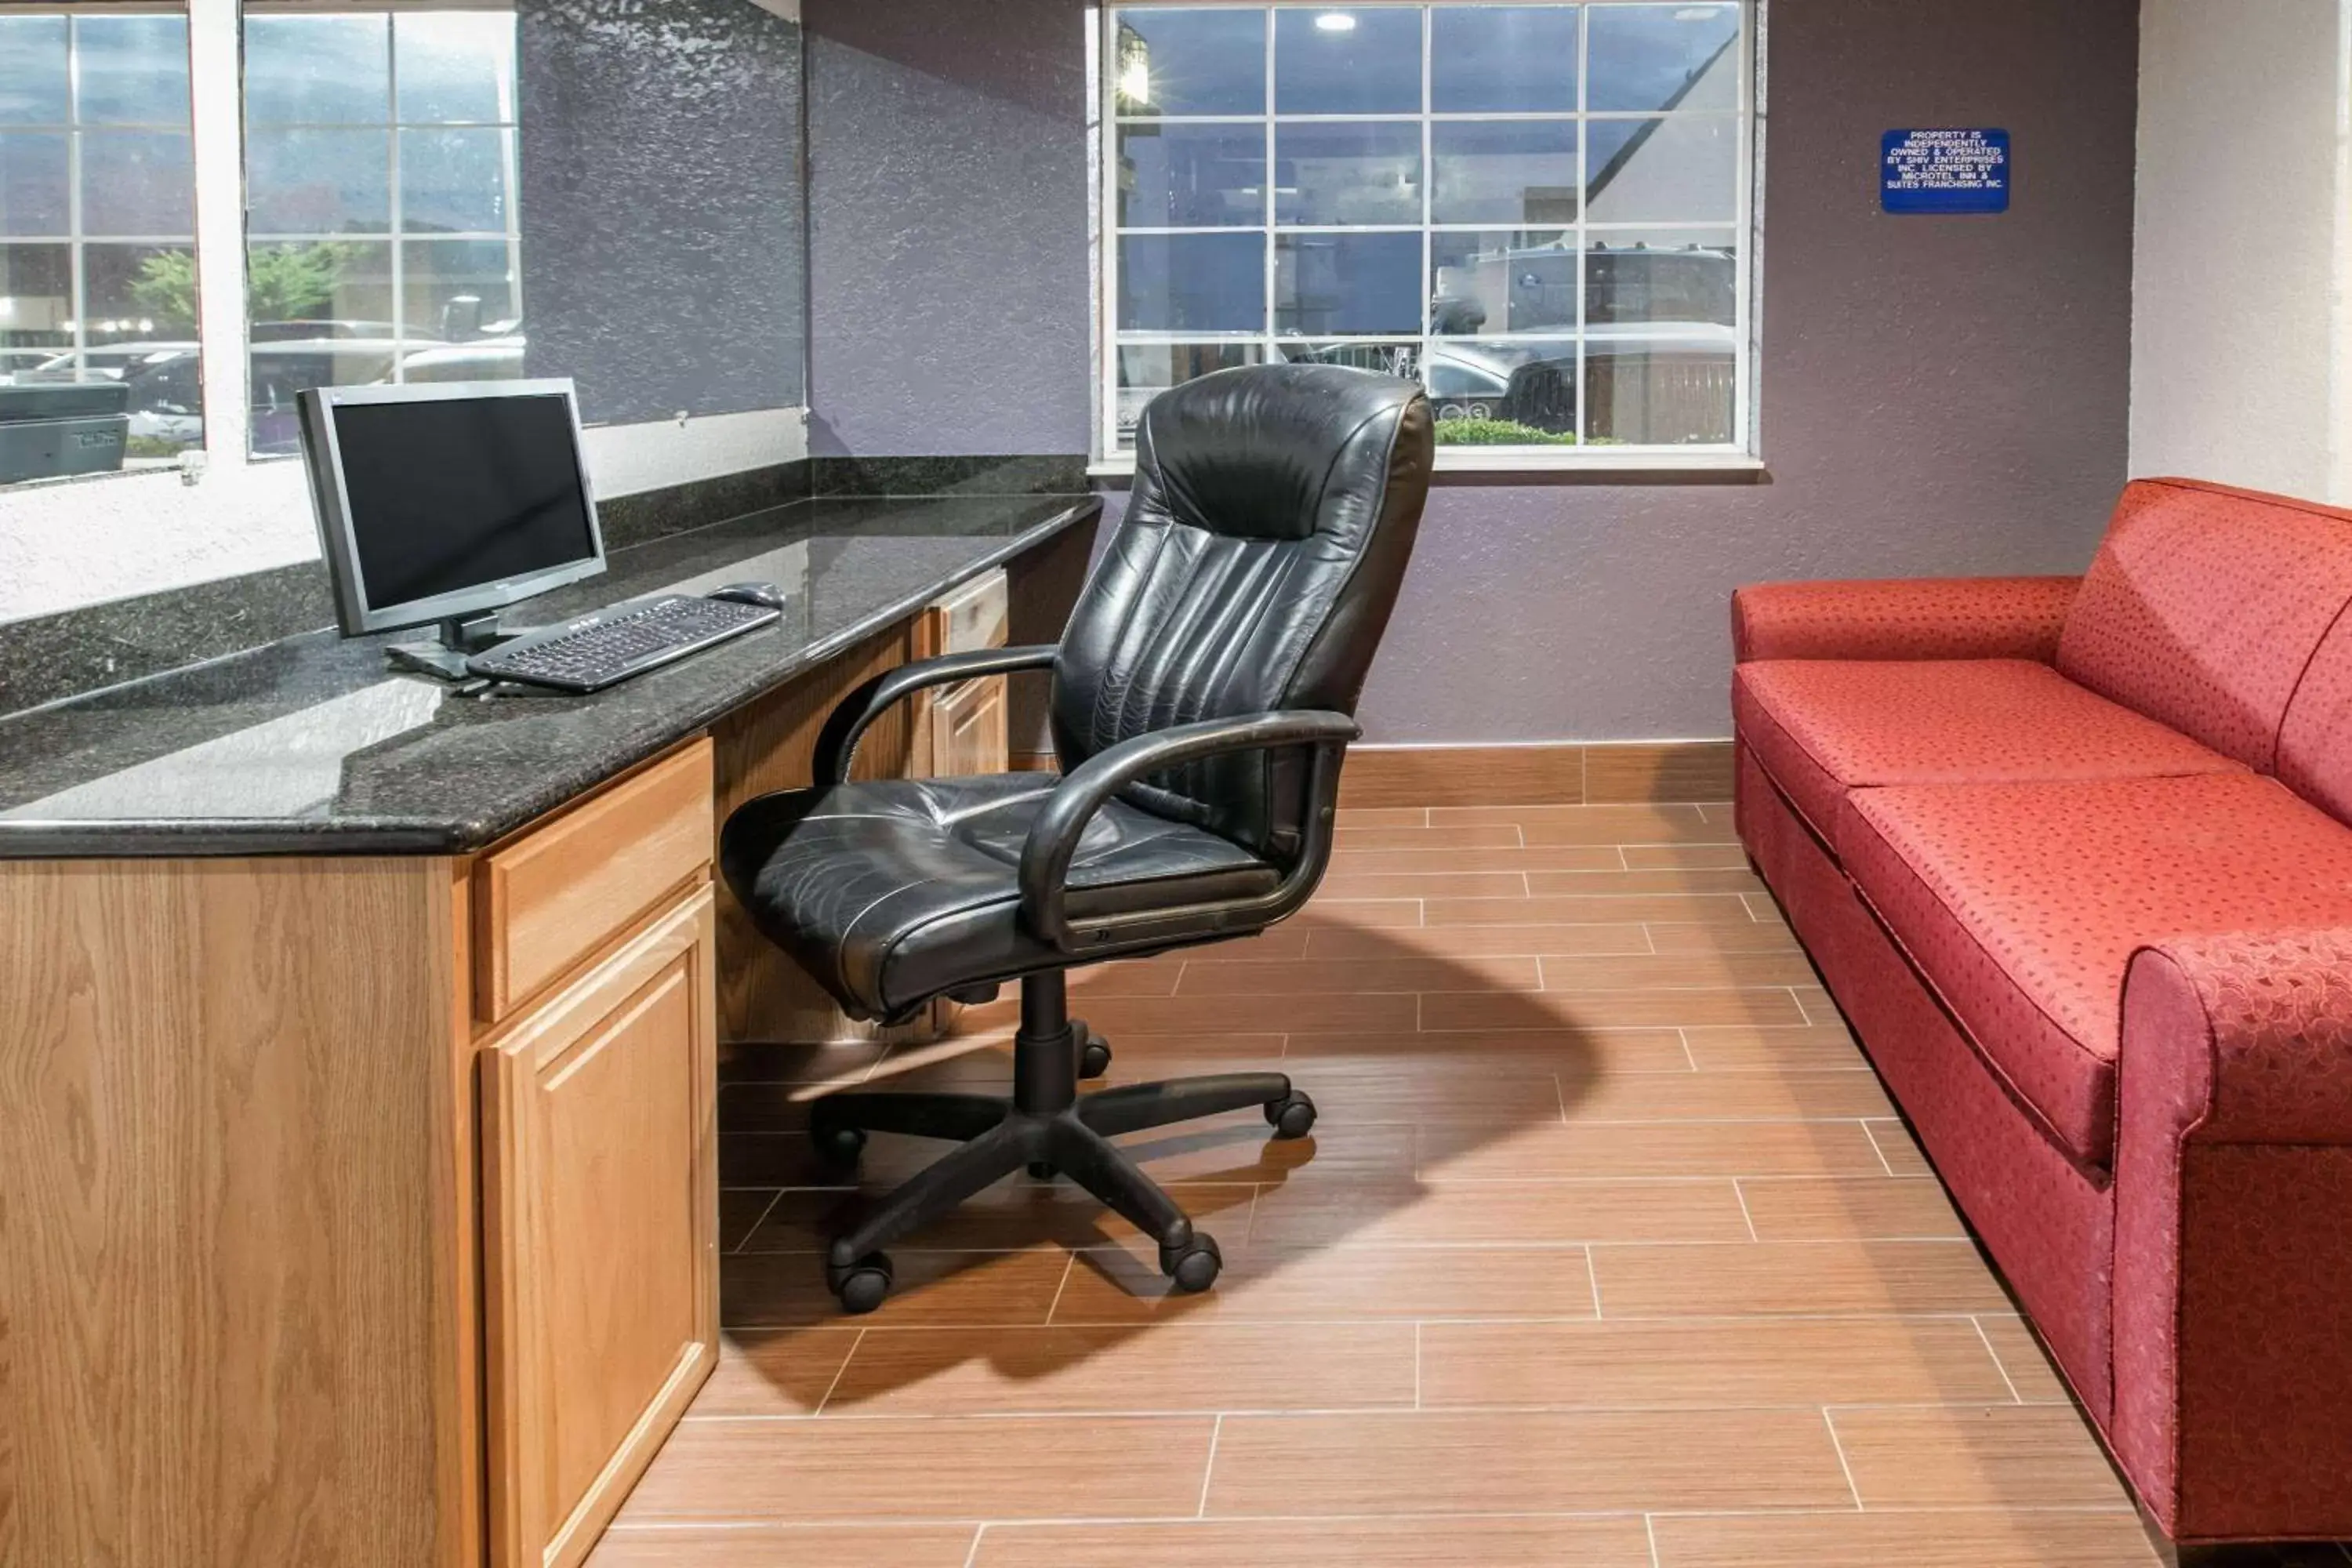 Business facilities in Microtel Inn & Suites by Wyndham Oklahoma City Airport